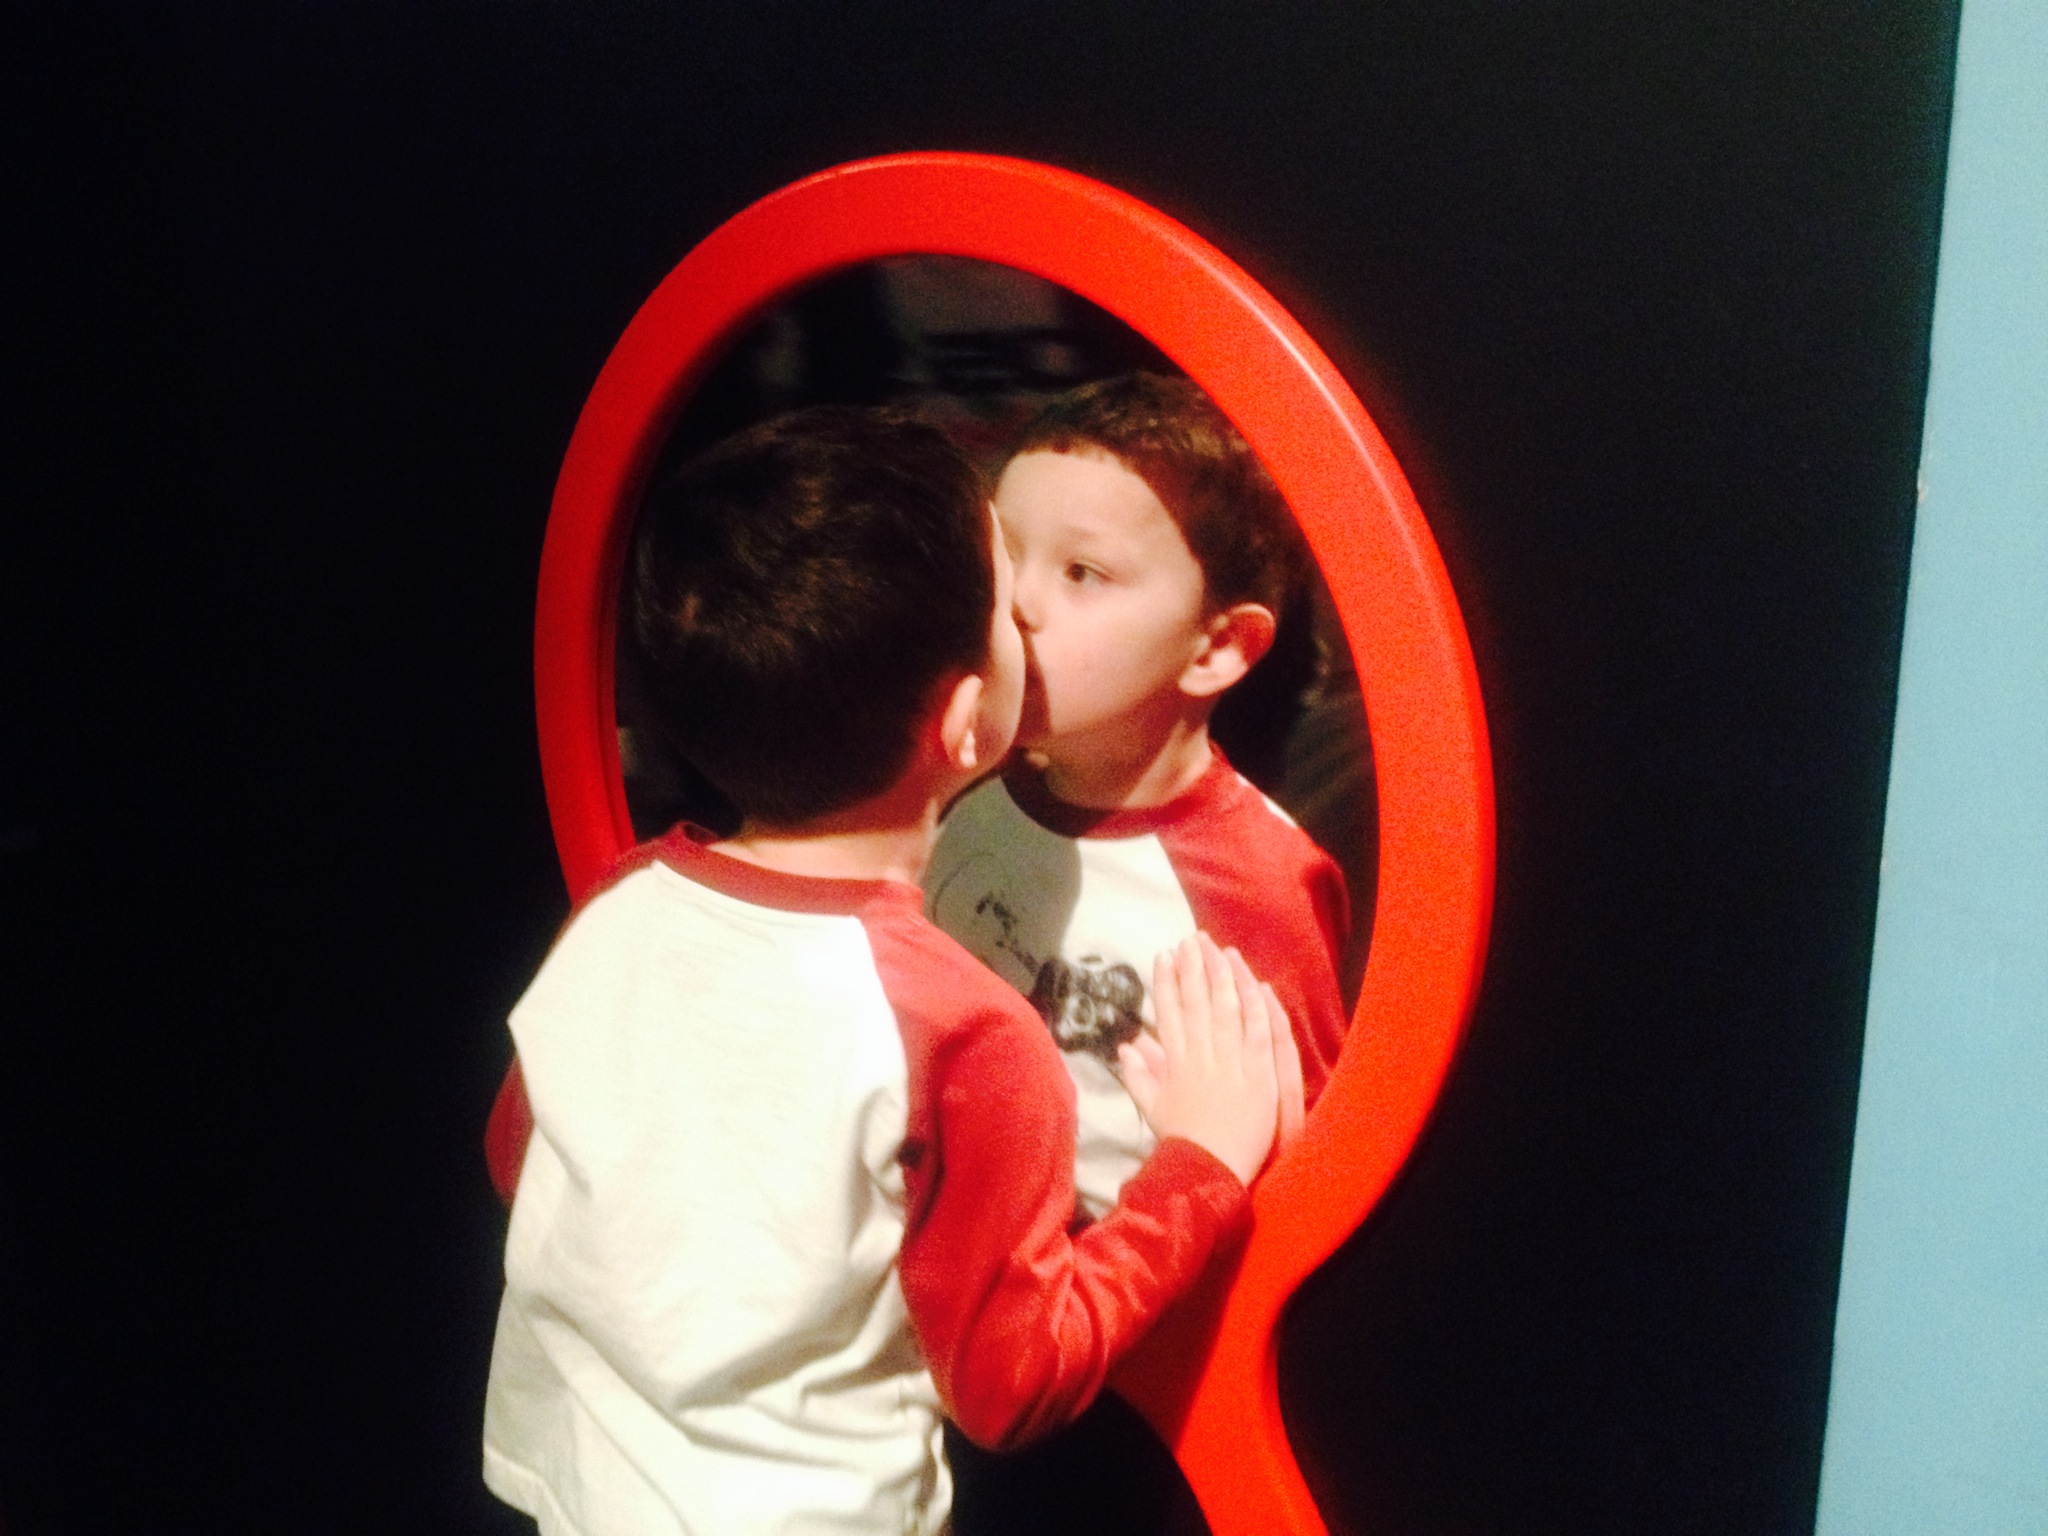 Sesame Street Presents: The Body at the Ontario Science Centre